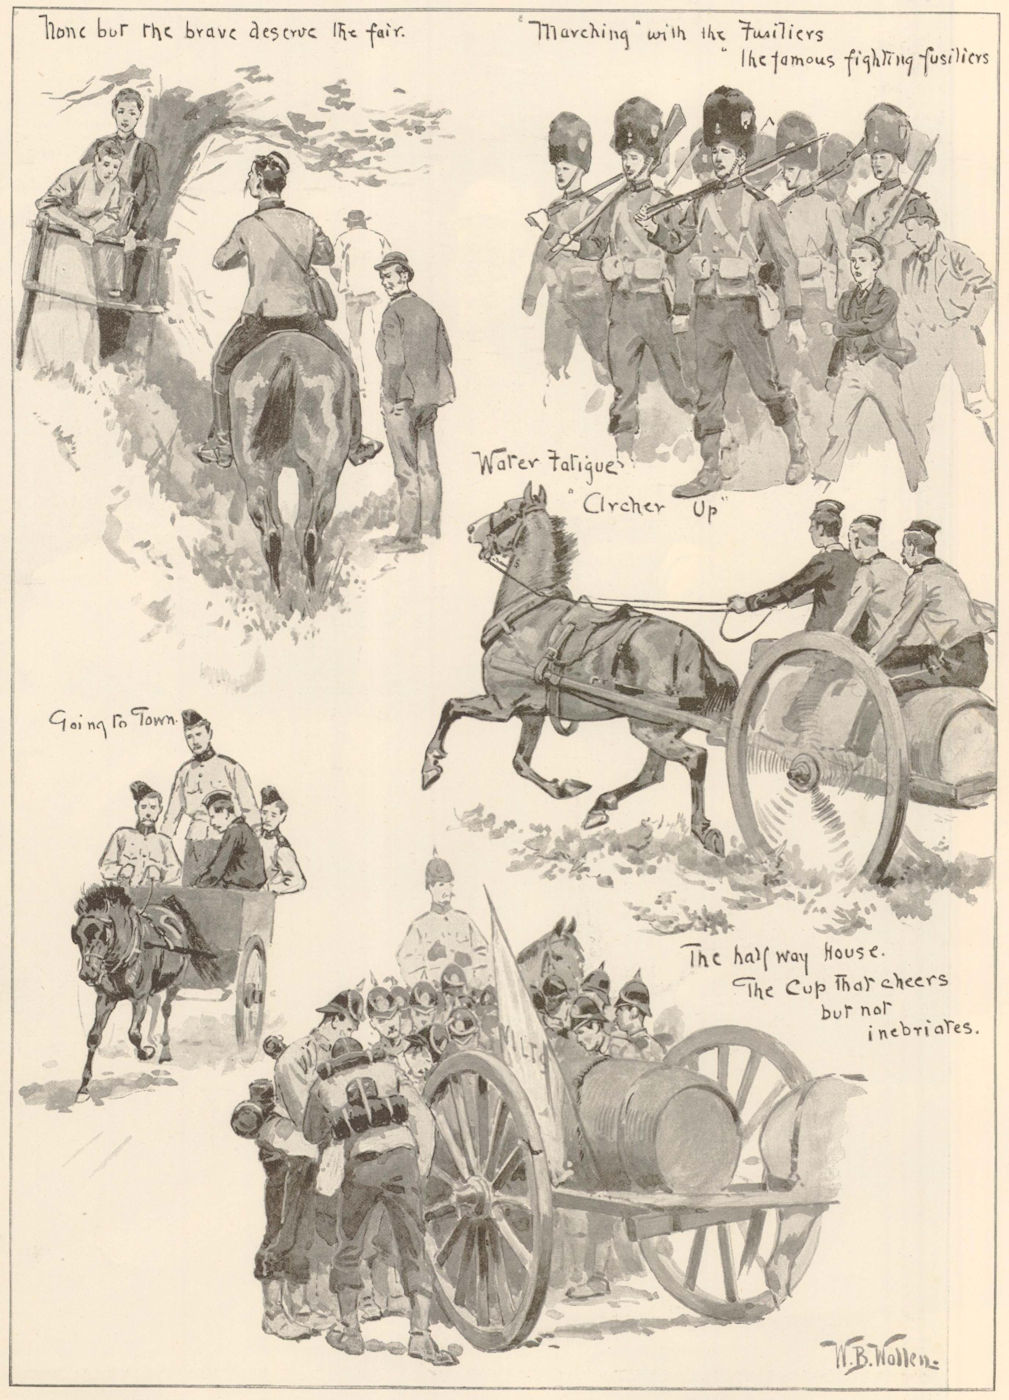 Associate Product The Autumn Military manoeuvres: on the way from Aldershot. Hampshire 1893